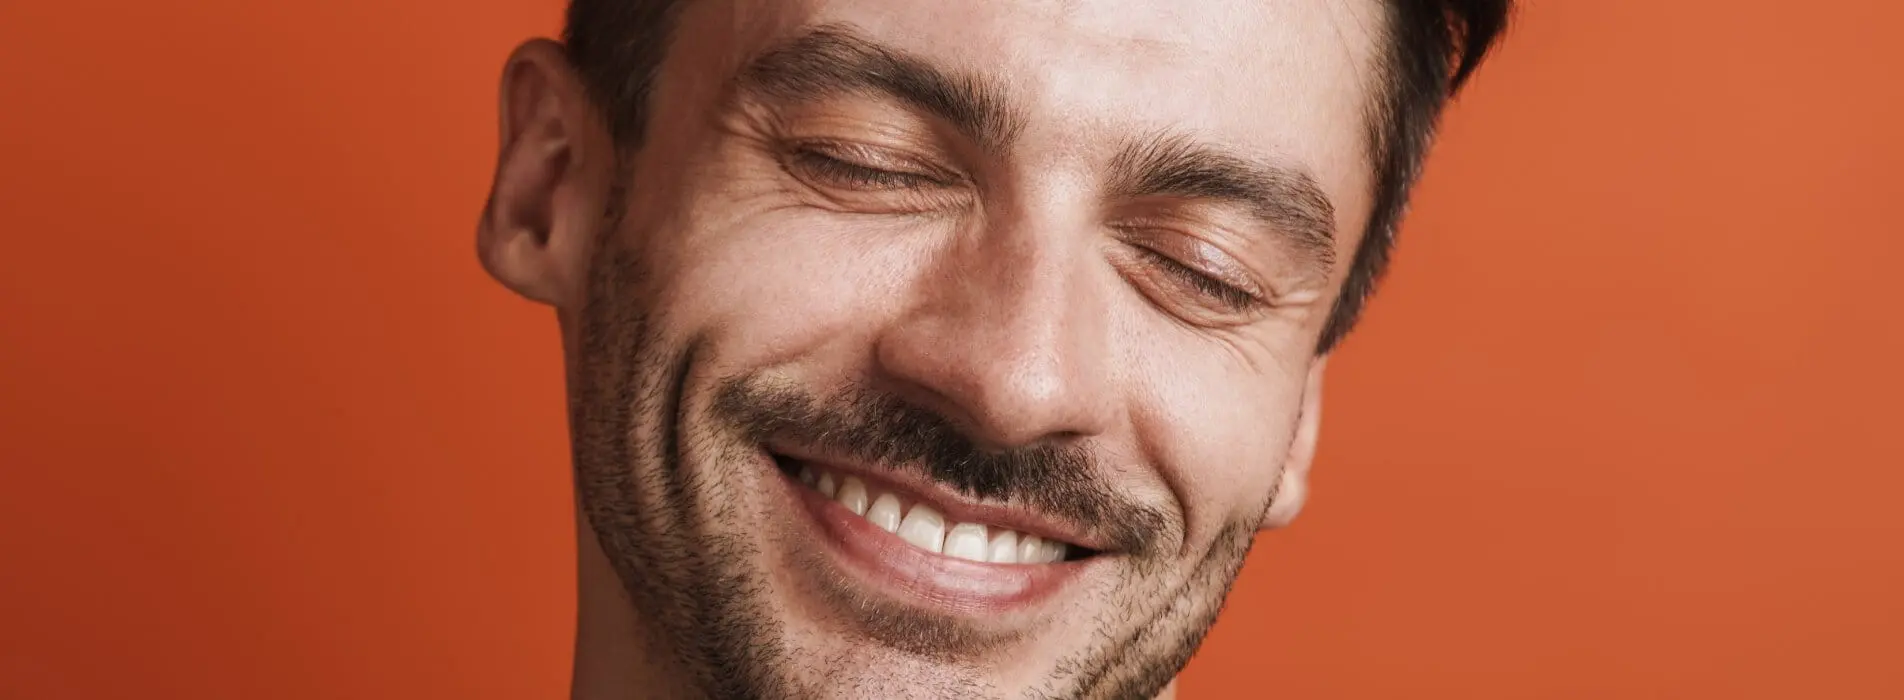 Relaxed smiling man